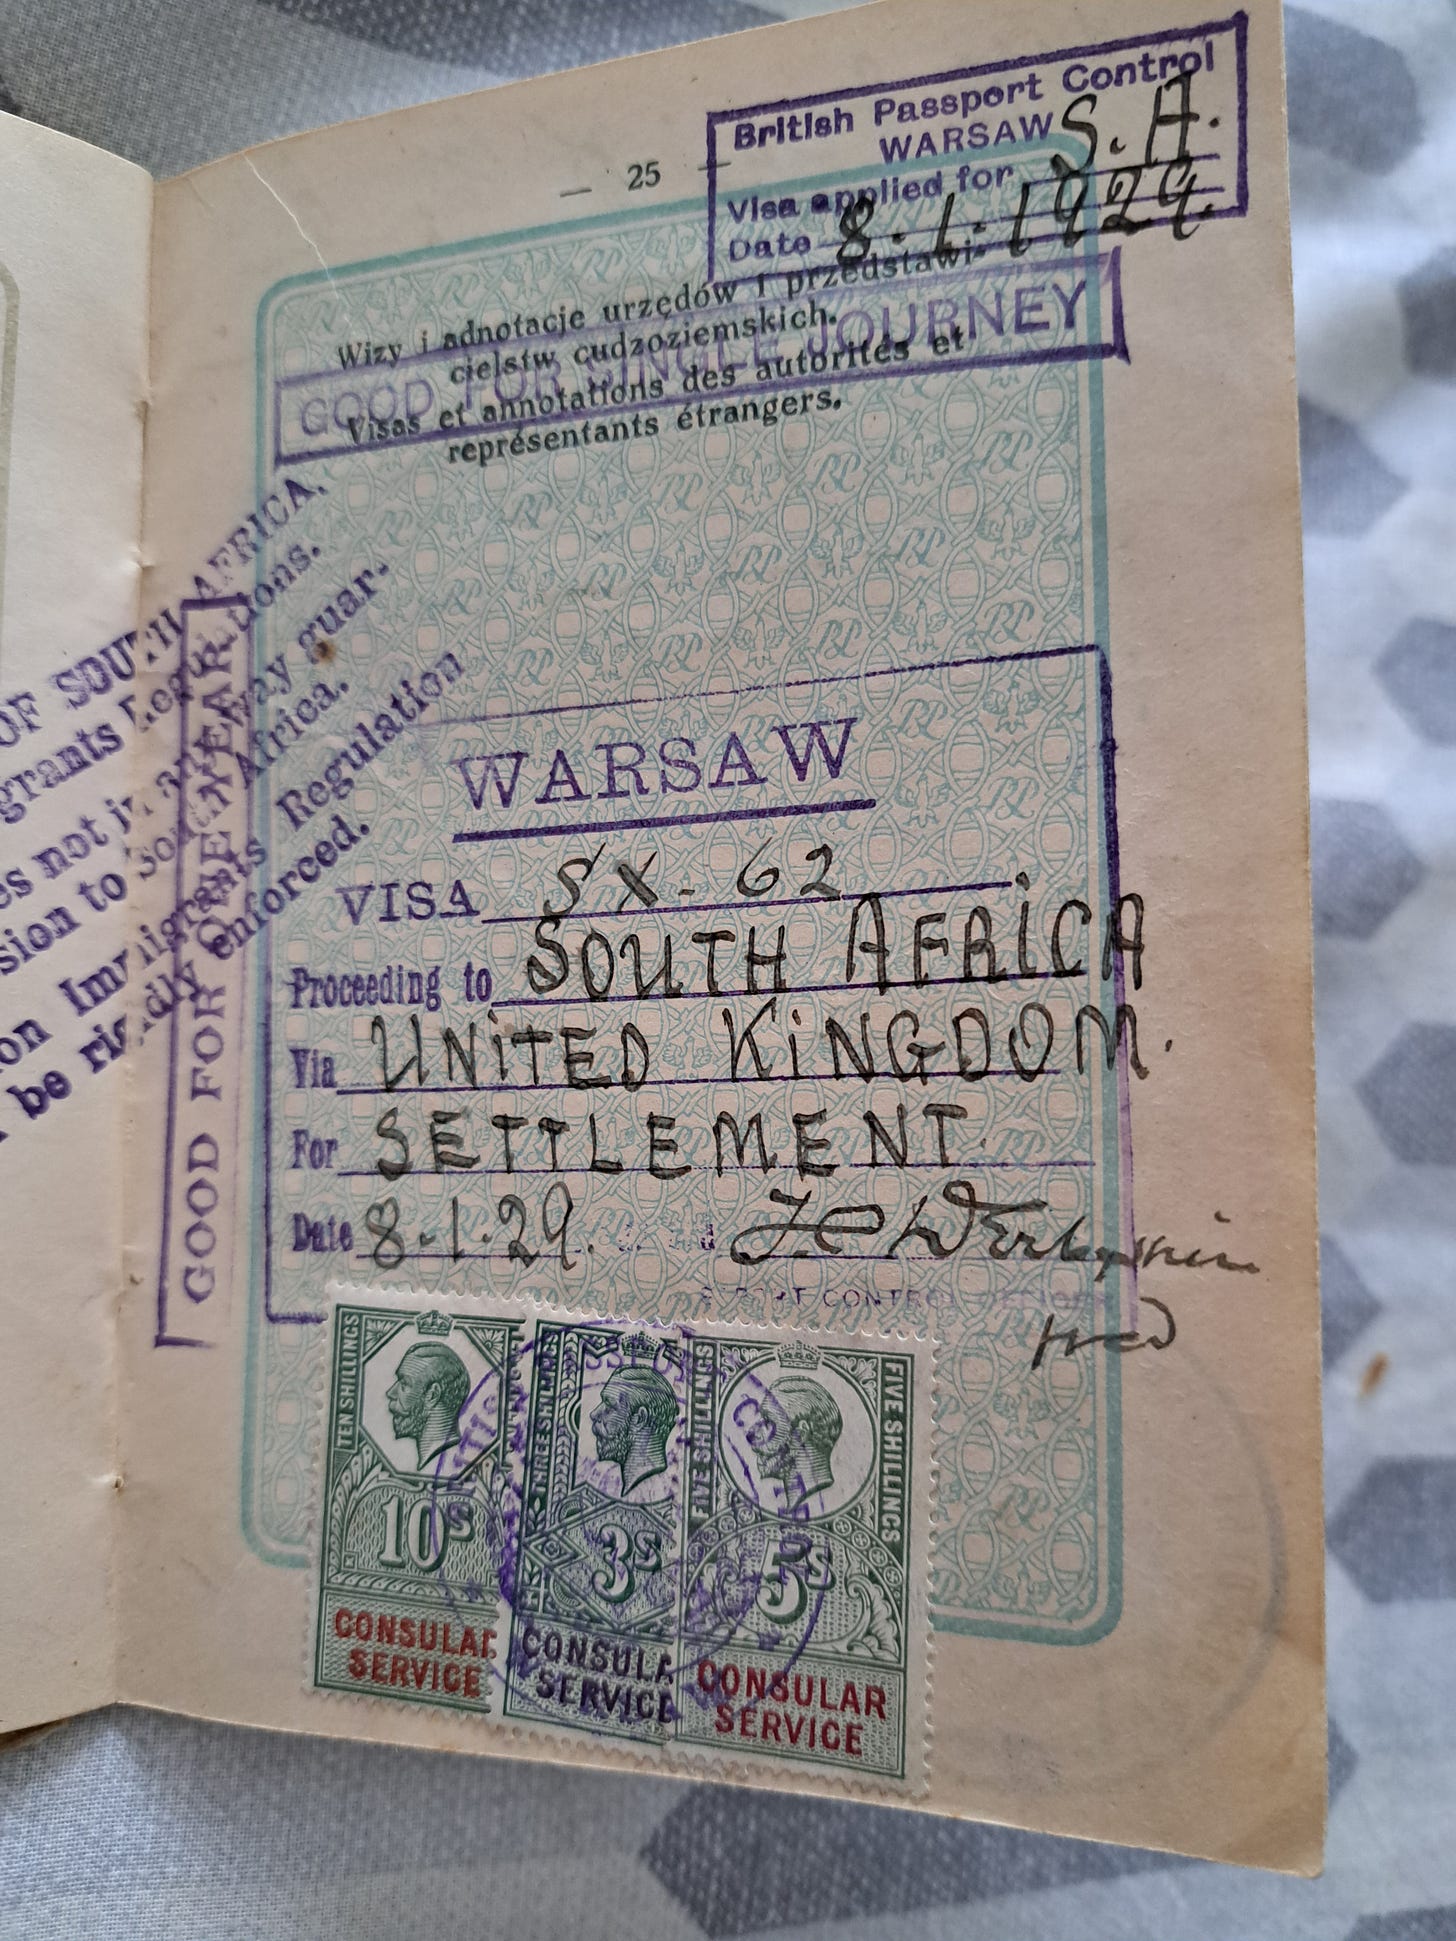 My grandfather's visa for settlement in South Africa